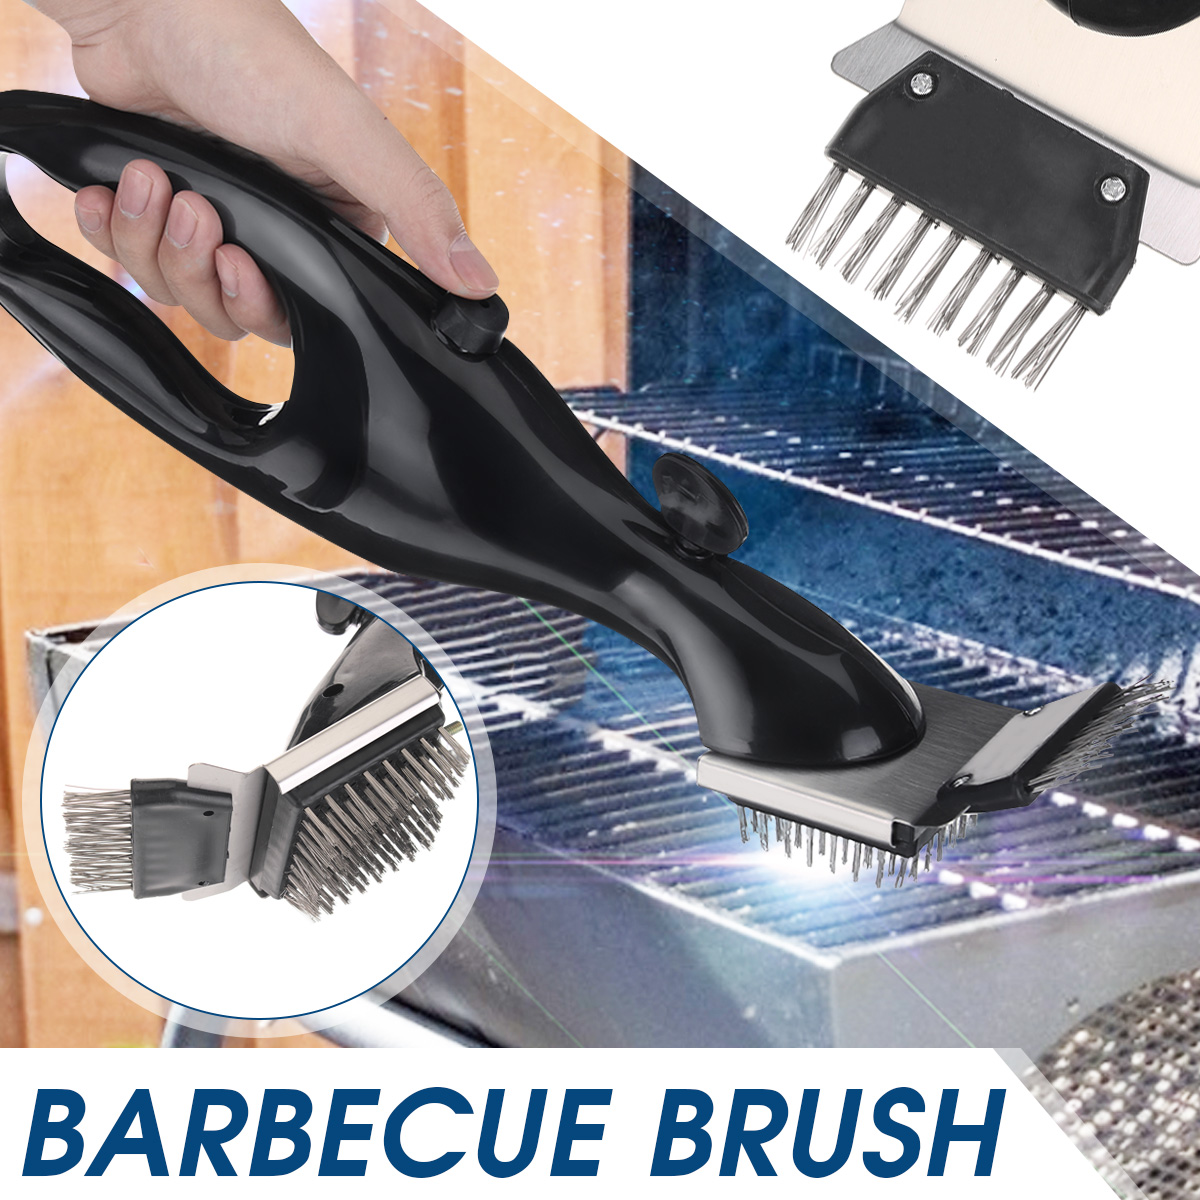 Stainless-Steel-BBQ-Grill-Cleaning-Tools-Outdoor-Barbecue-Picnics-Brush-Cleaner-1652170-1